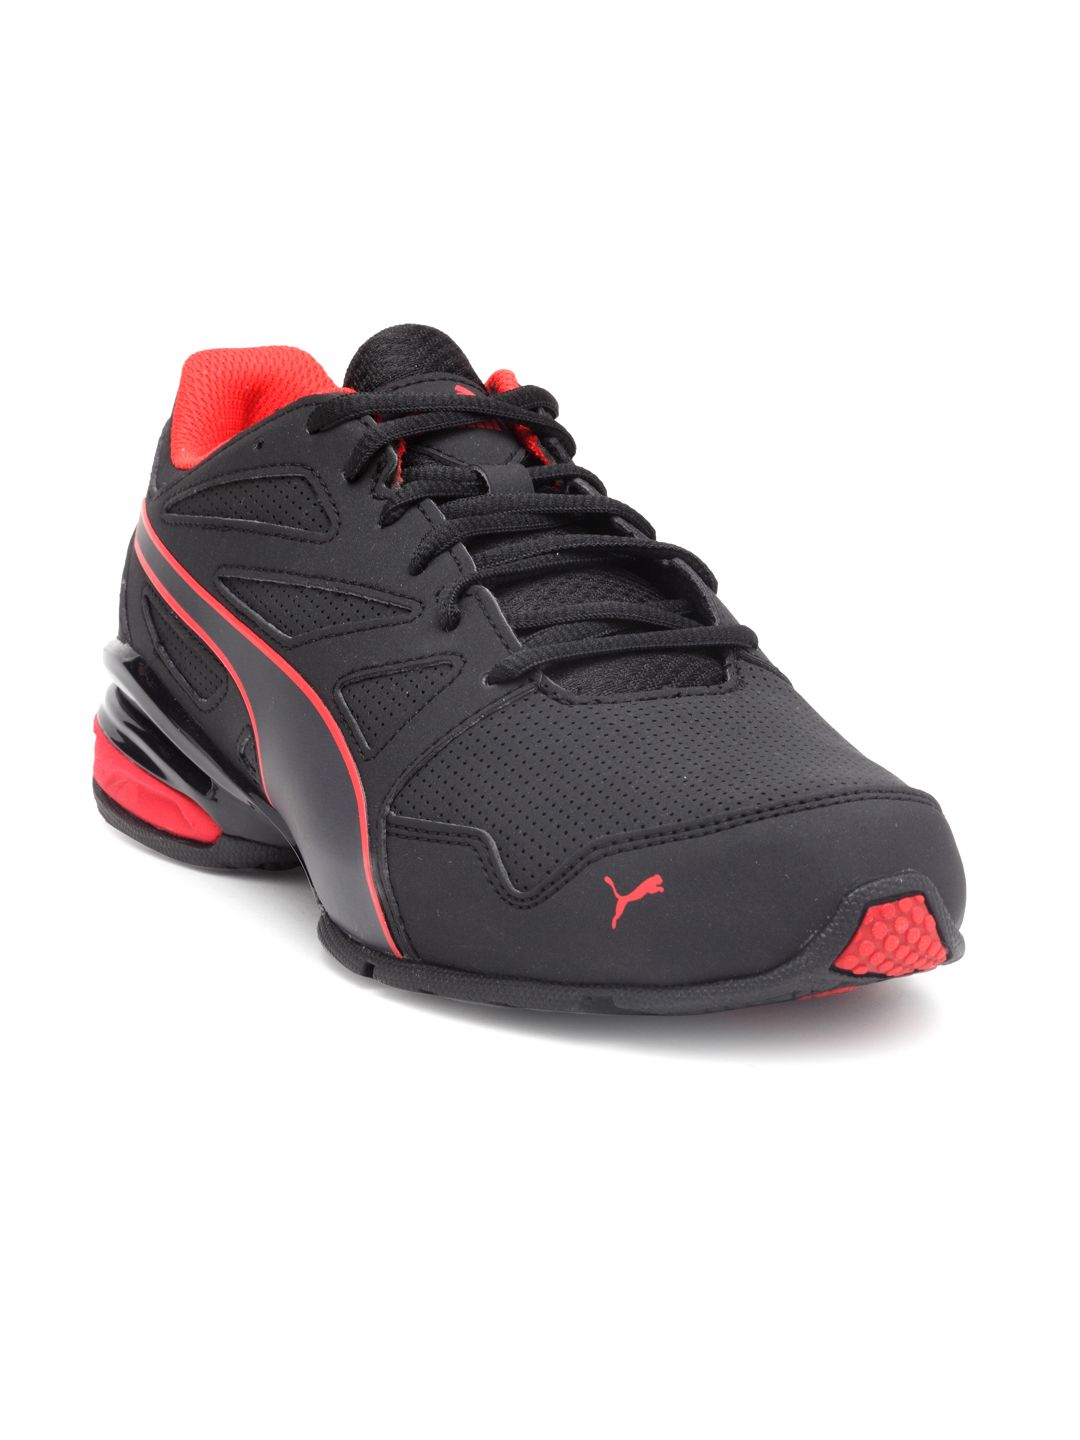 Puma Tazonmodernsl Black Running Shoes for Men online in India at Best ...